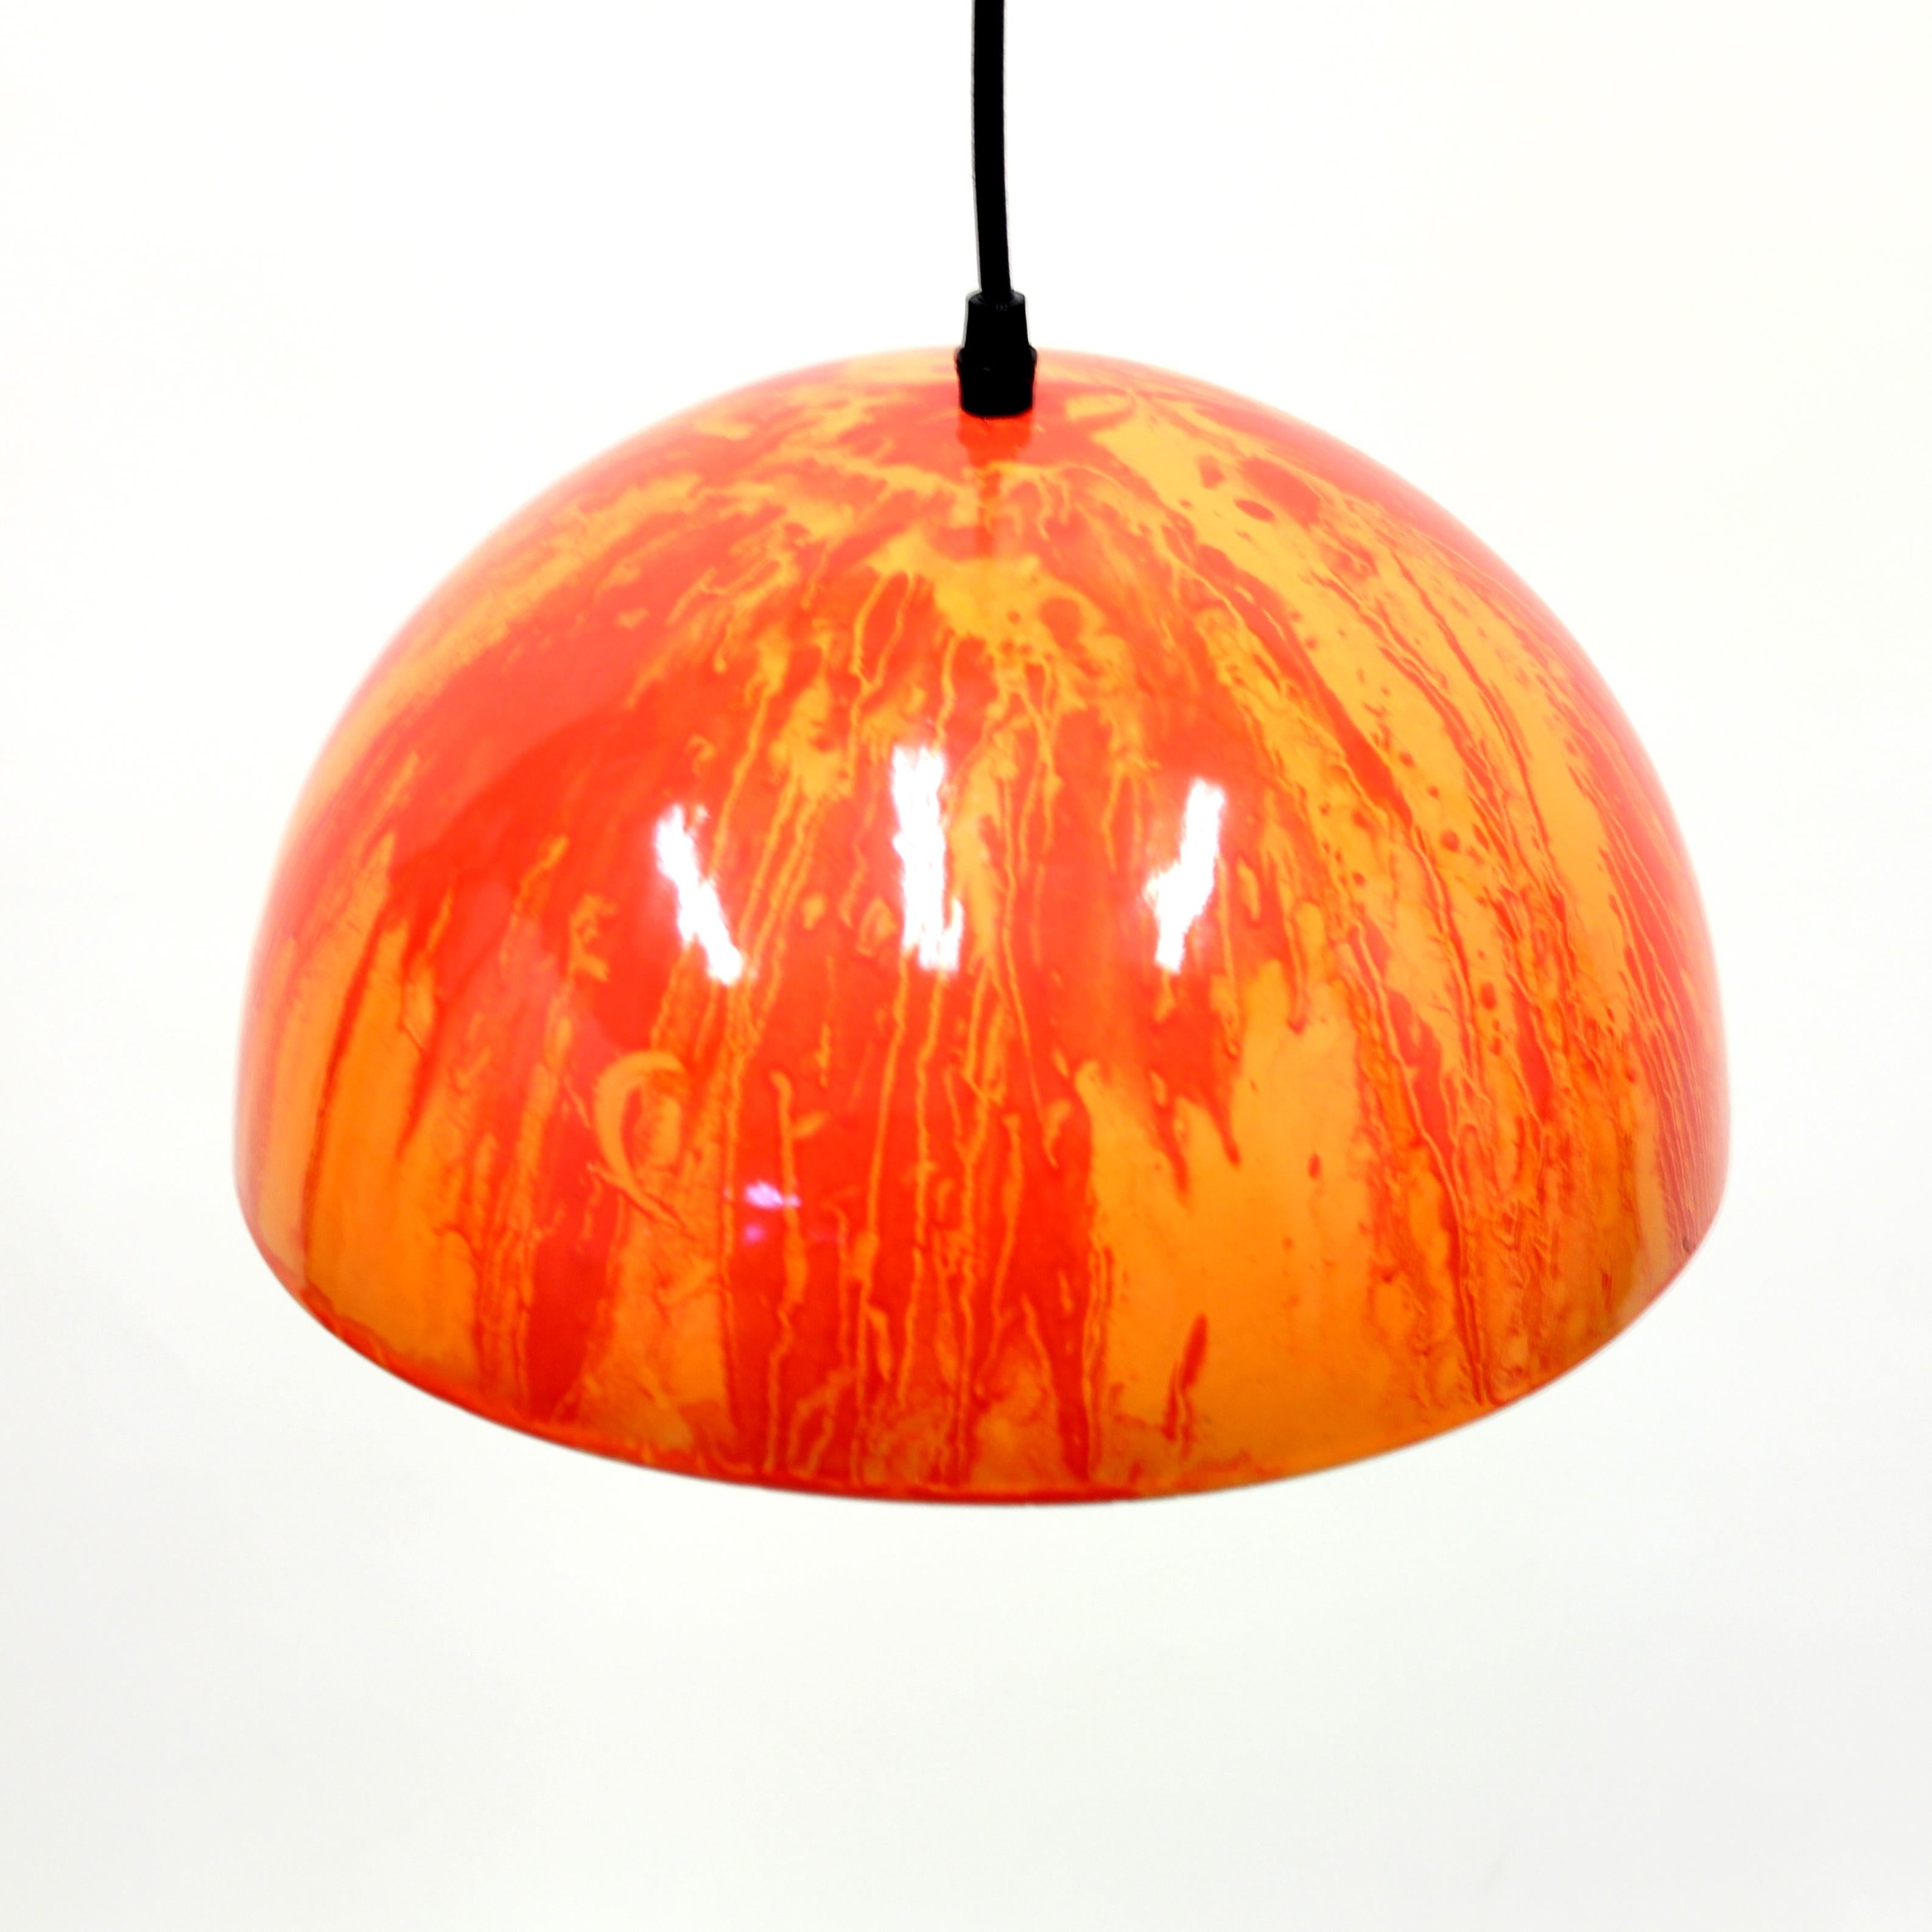 Red and orange enamel ceiling lamp from the 1970s. Most likely Swedish or Danish. White on the inside. Unknown producer. Good vintage condition with minor ware and completely new electric components including cable and plug.